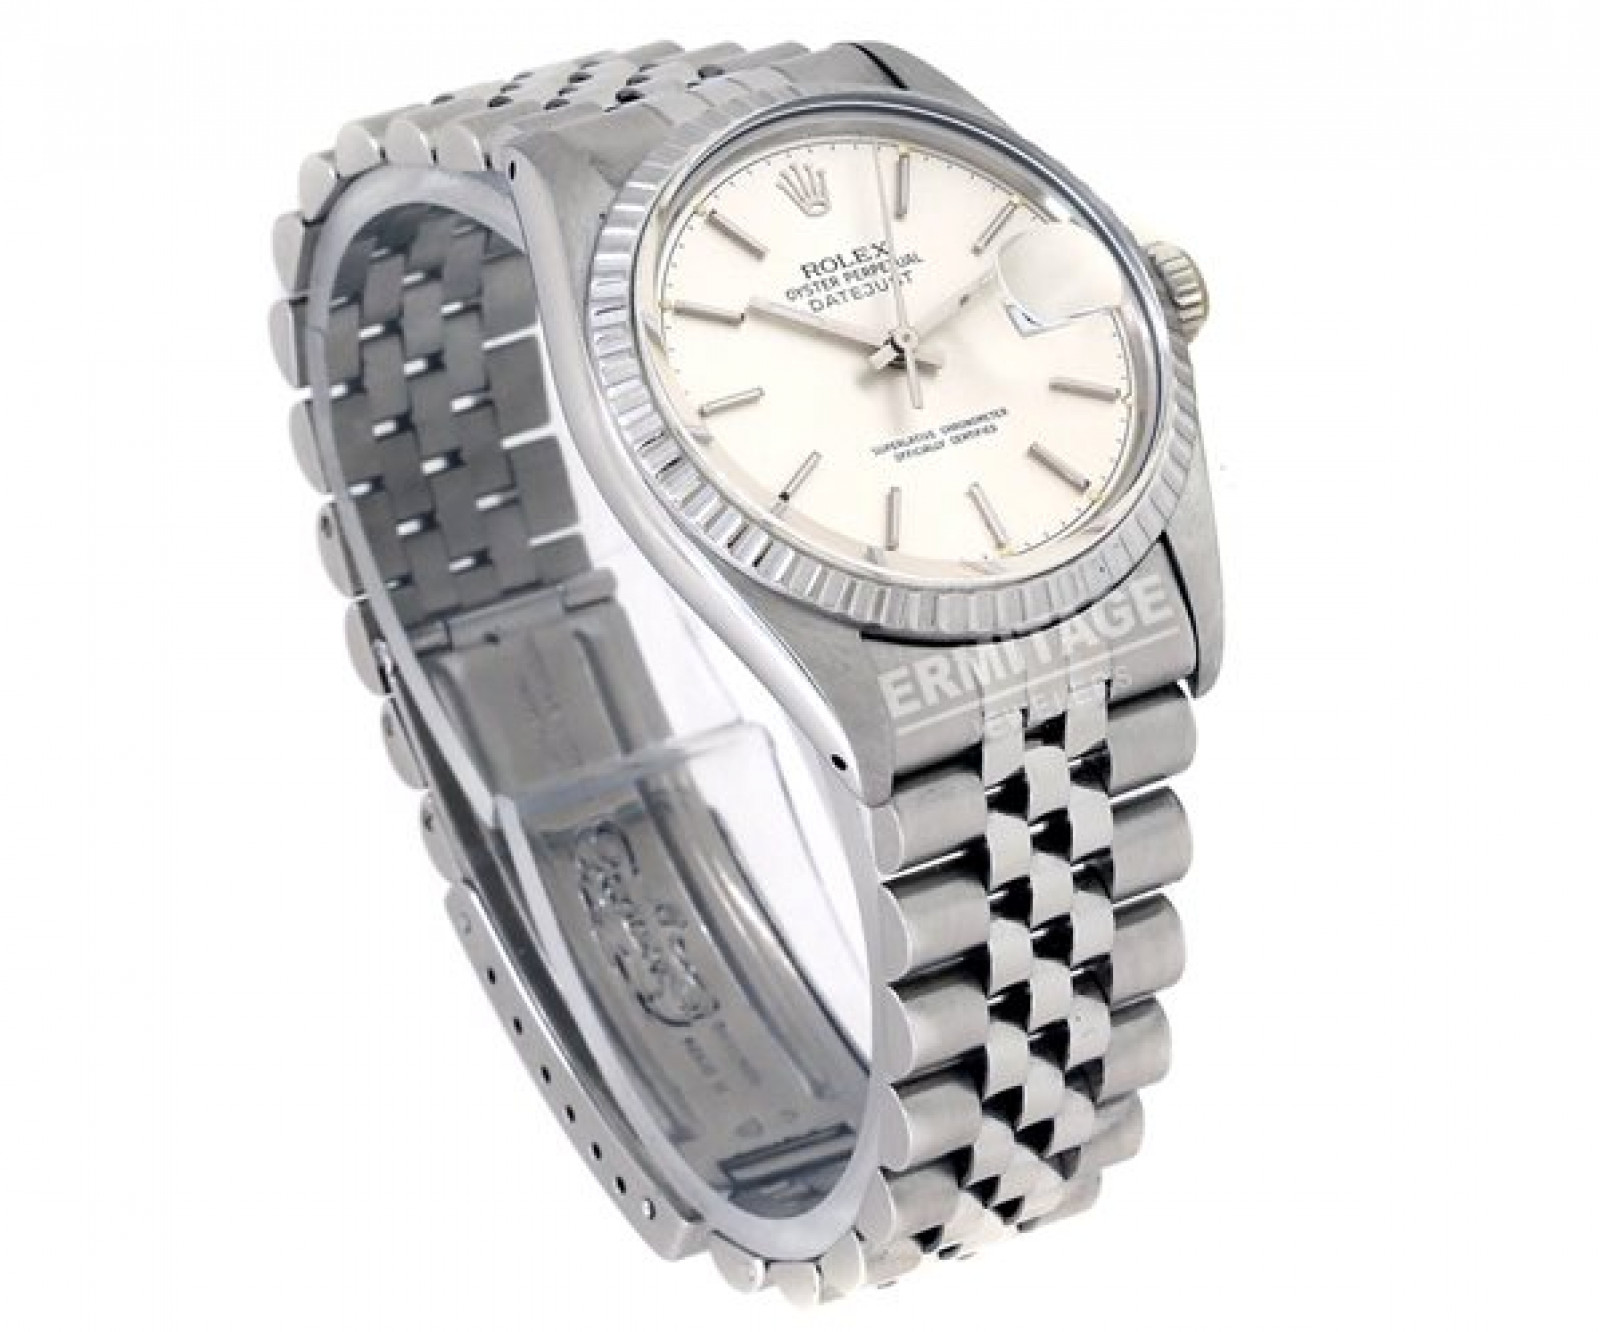 Rolex Datejust 16030 with Stainless Steel